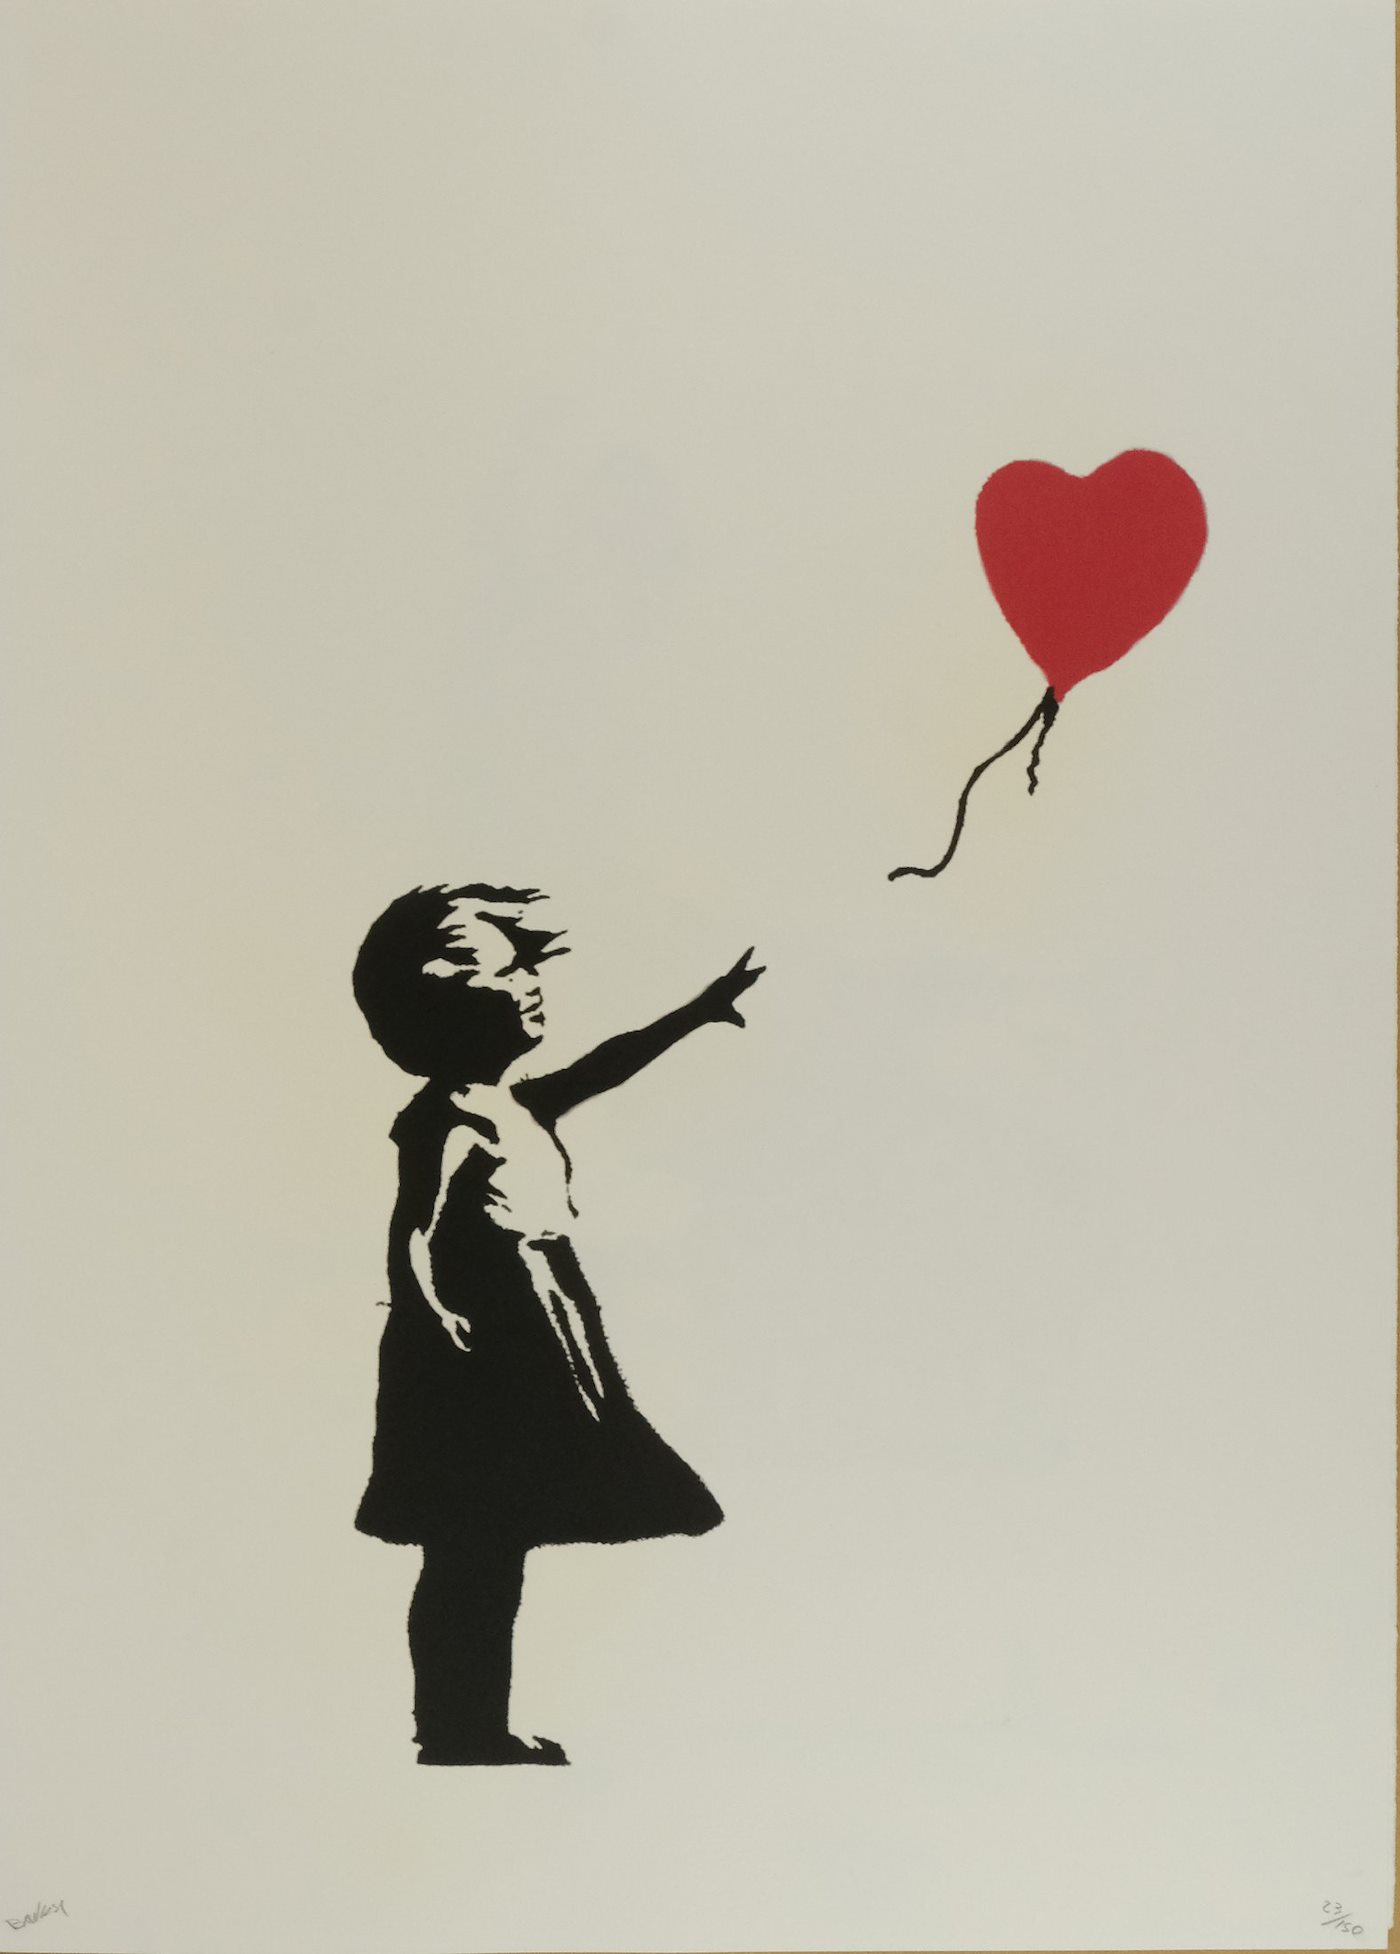 Banksy - Girl with red heart baloon